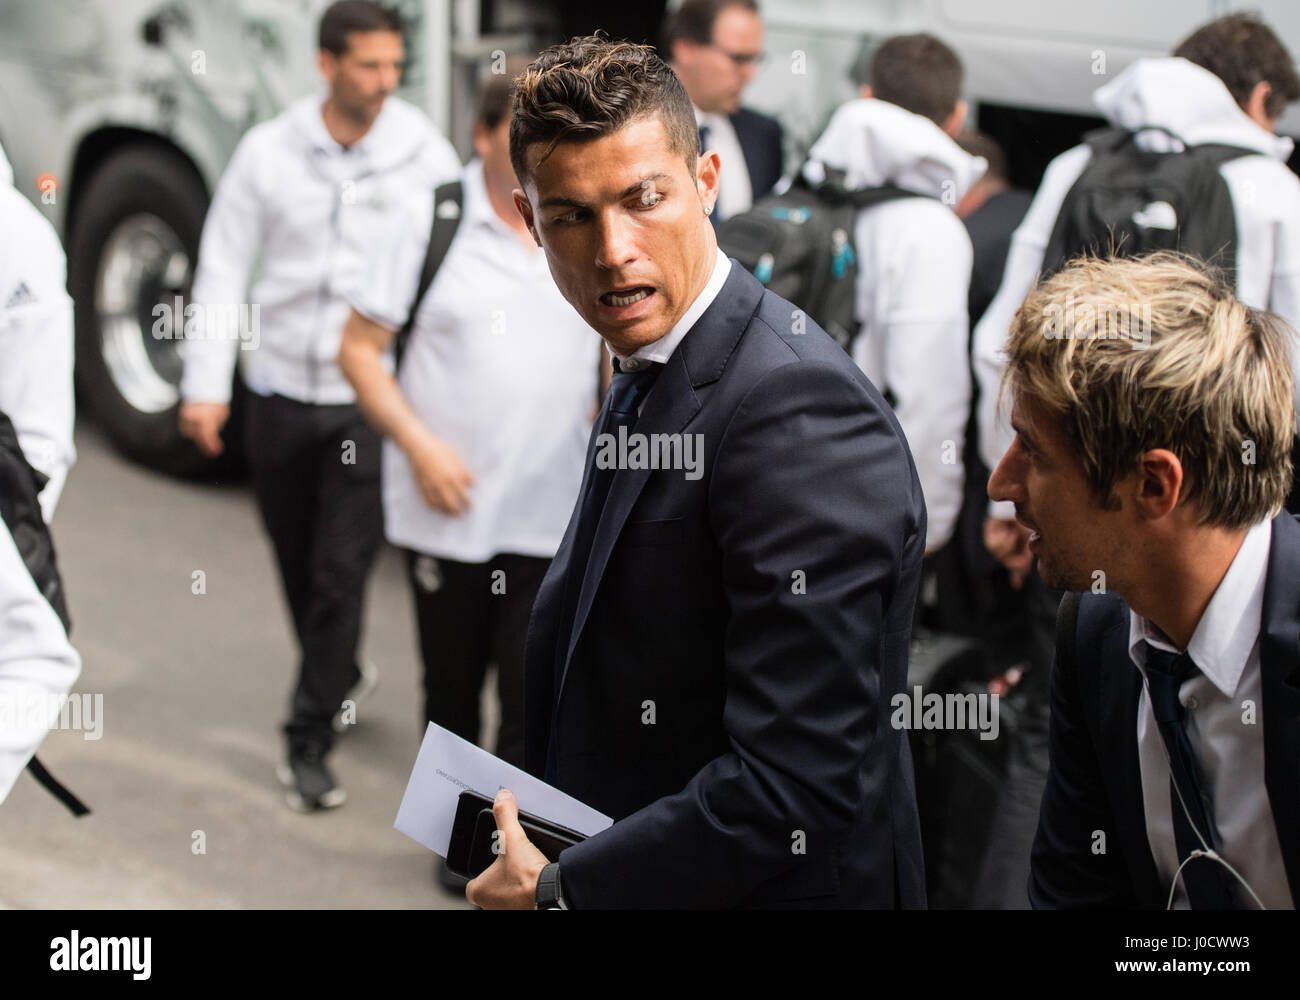 Munich, Germany. 11th Apr, 2017. Real Madrid's Cristiano Ronaldo (L) and Fabio Coentrao (R) arrive at the team hotel in Munich, Germany, 11 April 2017. The Champions League quarterfinals first leg match between FC Bayern Munich and Real Madrid begins 12 April 2017. Credit: dpa picture alliance/Alamy Live News Stock Photo